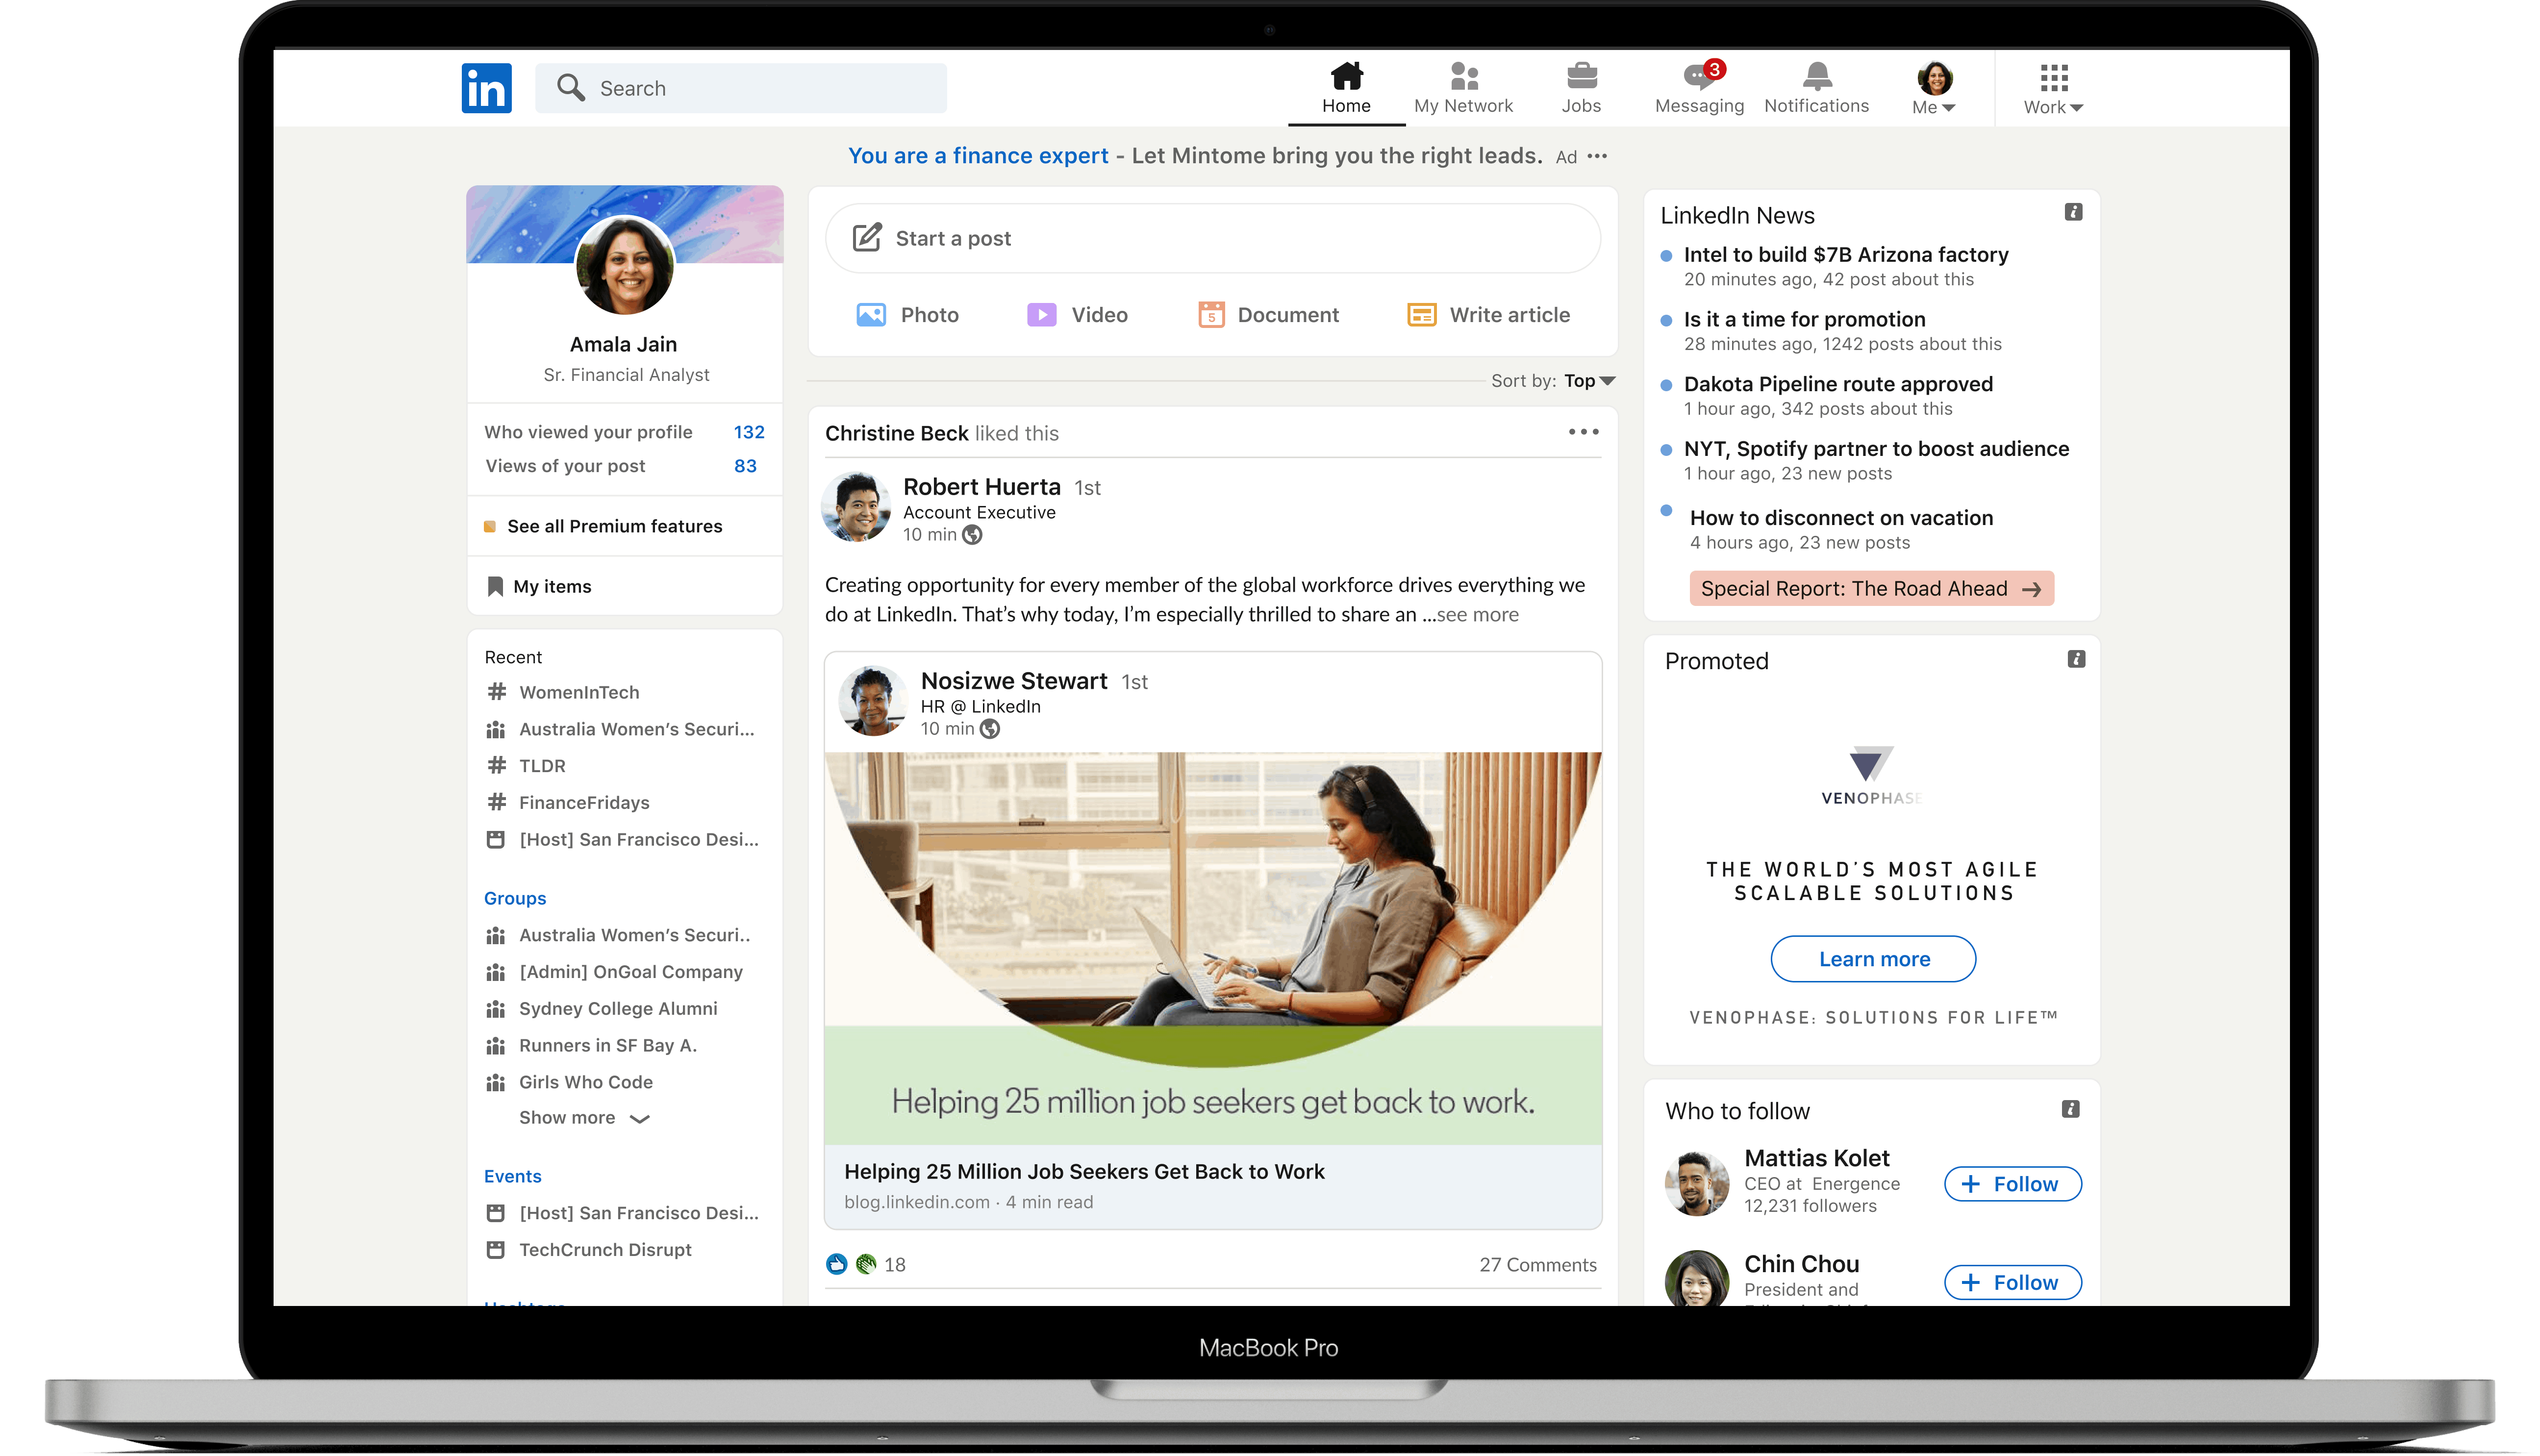 New LinkedIn user interface from September 2020 showing new UI on apple macbook